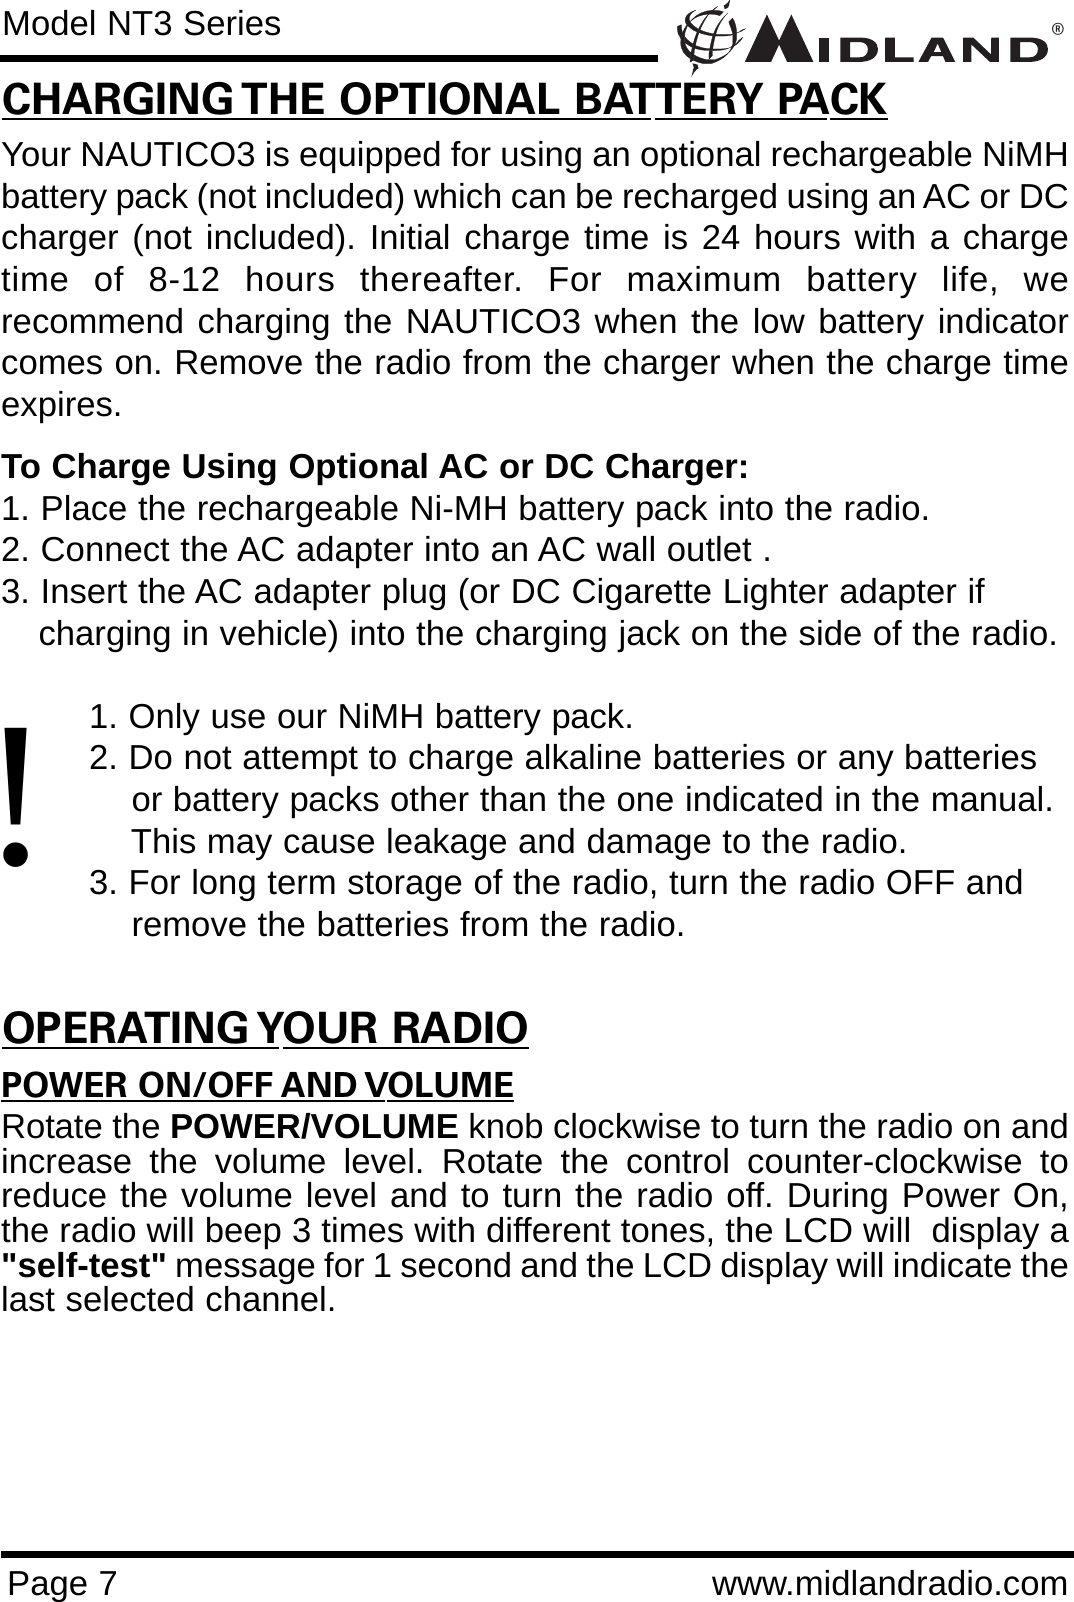 ®Page 7 www.midlandradio.comCHARGING THE OPTIONAL BATTERY PACKYour NAUTICO3 is equipped for using an optional rechargeable NiMHbattery pack (not included) which can be recharged using an AC or DCcharger (not included). Initial charge time is 24 hours with a chargetime of 8-12 hours thereafter. For maximum battery life, werecommend charging the NAUTICO3 when the low battery indicatorcomes on. Remove the radio from the charger when the charge timeexpires.To Charge Using Optional AC or DC Charger:1. Place the rechargeable Ni-MH battery pack into the radio.2. Connect the AC adapter into an AC wall outlet .3. Insert the AC adapter plug (or DC Cigarette Lighter adapter if   charging in vehicle) into the charging jack on the side of the radio.1. Only use our NiMH battery pack.2. Do not attempt to charge alkaline batteries or any batteries or battery packs other than the one indicated in the manual. This may cause leakage and damage to the radio.3. For long term storage of the radio, turn the radio OFF and remove the batteries from the radio.POWER ON/OFF AND VOLUMERotate the POWER/VOLUME knob clockwise to turn the radio on andincrease the volume level. Rotate the control counter-clockwise toreduce the volume level and to turn the radio off. During Power On,the radio will beep 3 times with different tones, the LCD will  display a&quot;self-test&quot; message for 1 second and the LCD display will indicate thelast selected channel.Model NT3 Series!OPERATING YOUR RADIO